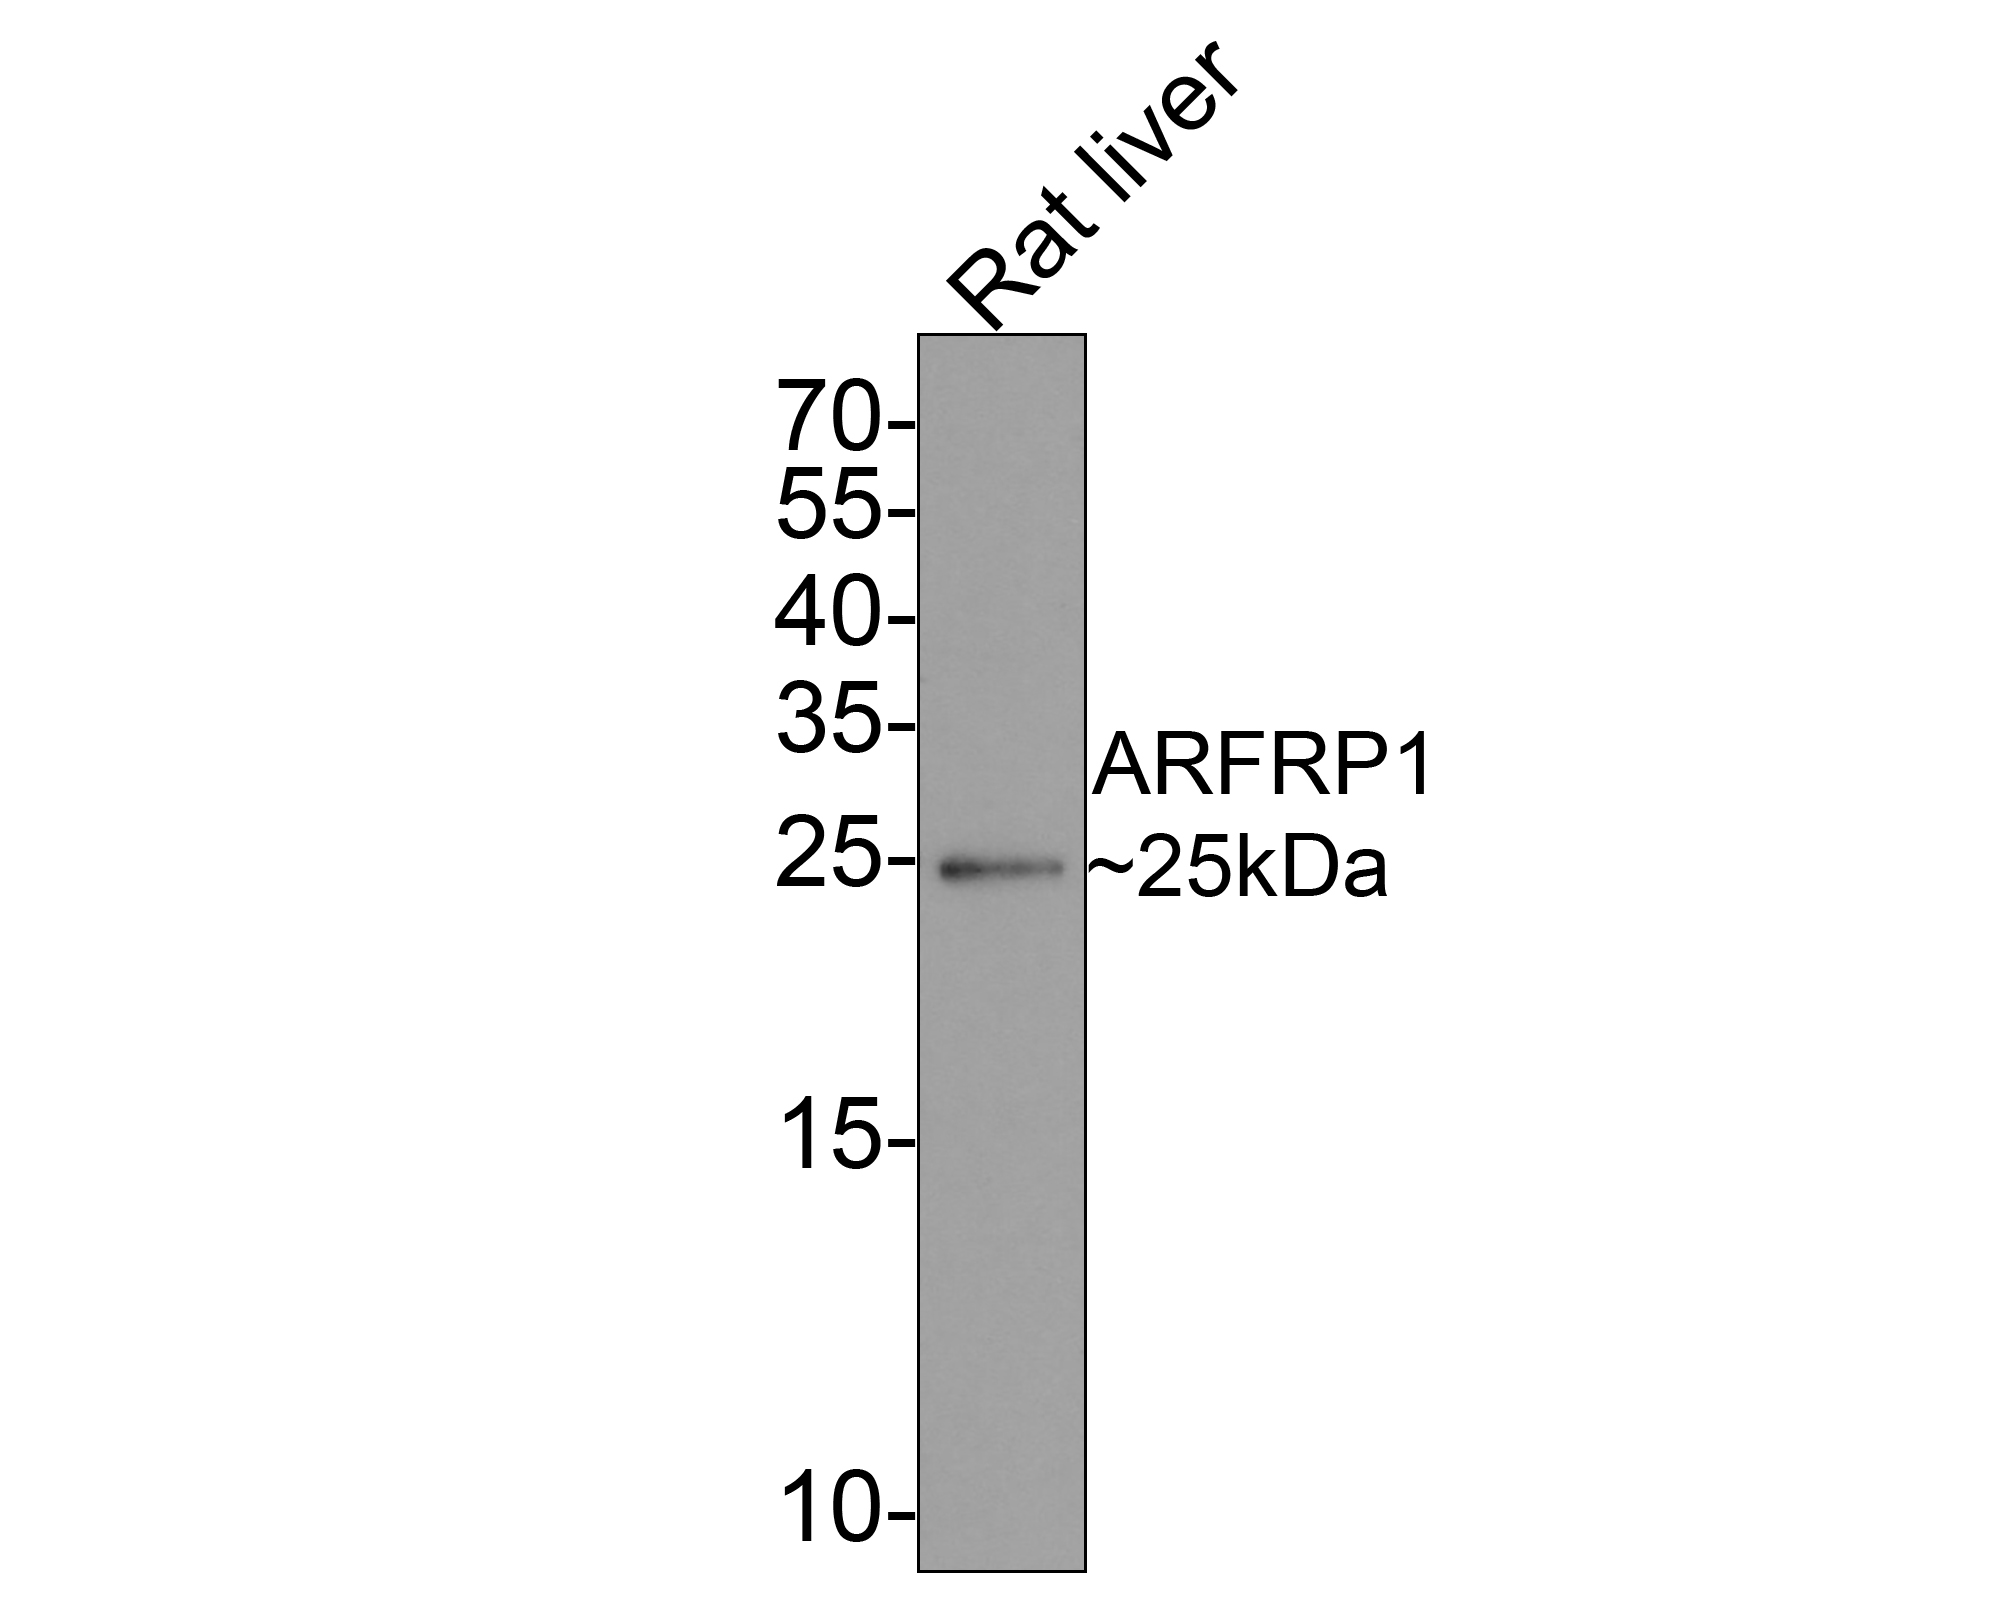 Western blot analysis of ARFRP1 on rat liver tissue lysates with Rabbit anti-ARFRP1 antibody (HA721020) at 1/500 dilution.<br />
<br />
Lysates/proteins at 20 µg/Lane.<br />
<br />
Predicted band size: 23 kDa<br />
Observed band size: 25 kDa<br />
<br />
Exposure time: 2 minutes;<br />
<br />
15% SDS-PAGE gel.<br />
<br />
Proteins were transferred to a PVDF membrane and blocked with 5% NFDM/TBST for 1 hour at room temperature. The primary antibody (HA721020) at 1/500 dilution was used in 5% NFDM/TBST at room temperature for 2 hours. Goat Anti-Rabbit IgG - HRP Secondary Antibody (HA1001) at 1:200,000 dilution was used for 1 hour at room temperature.